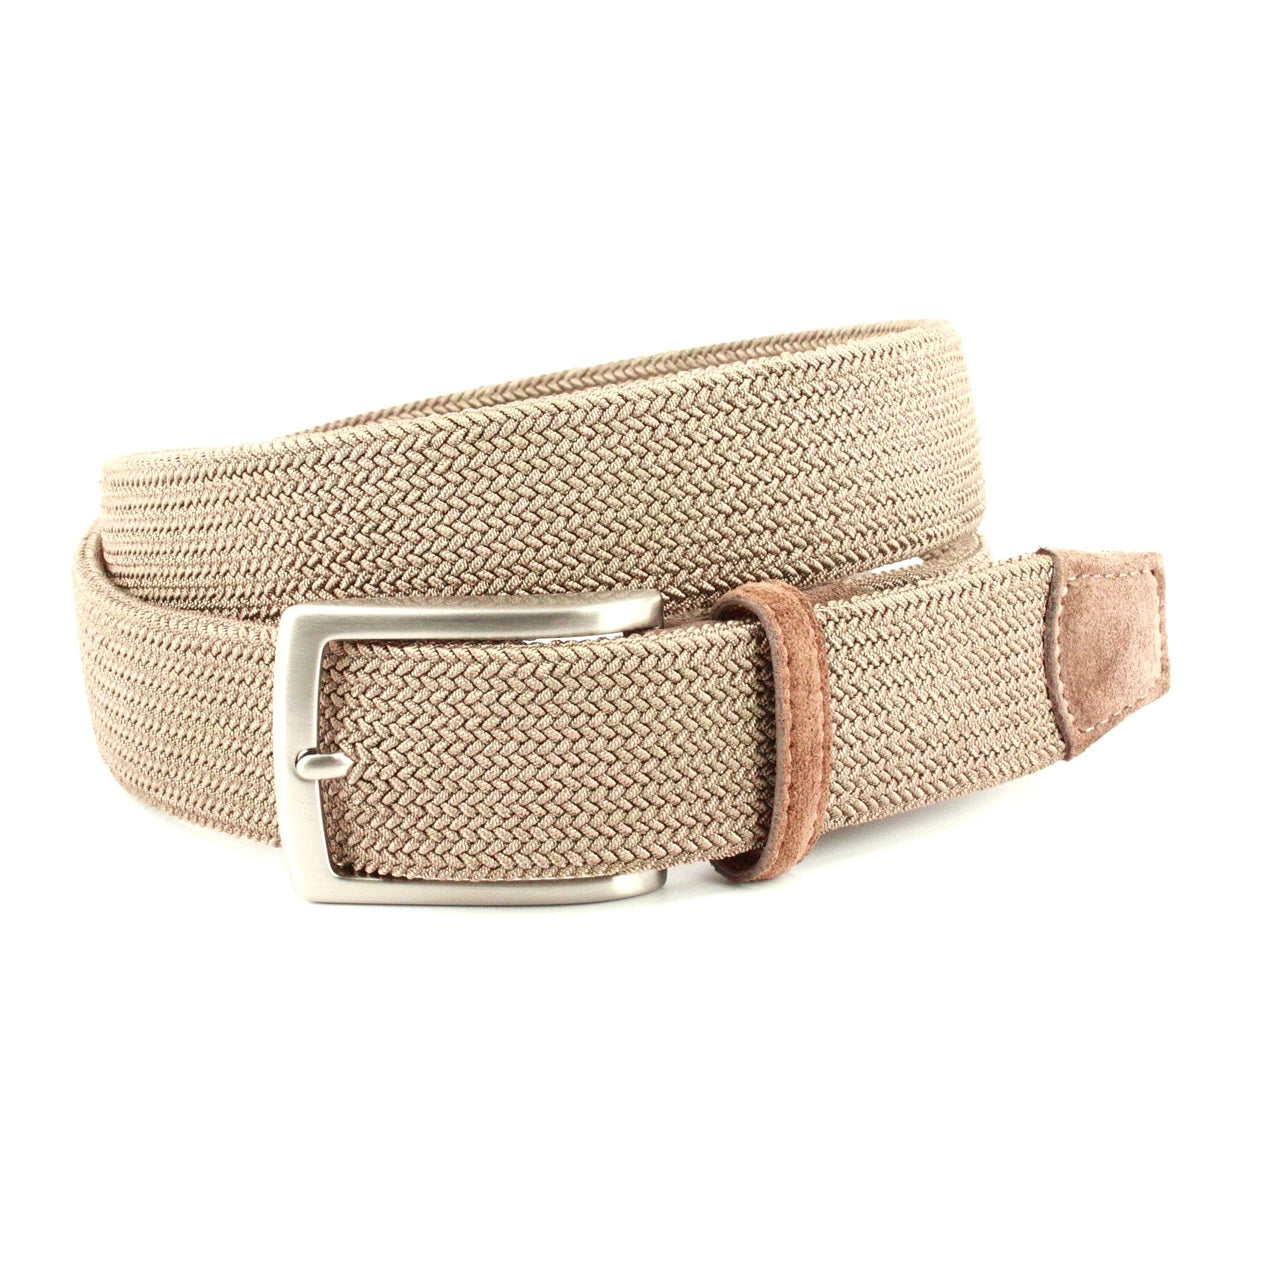 Italian Tubular Woven Stretch Belt with Suede End & Loop in Khaki by Torino Leather